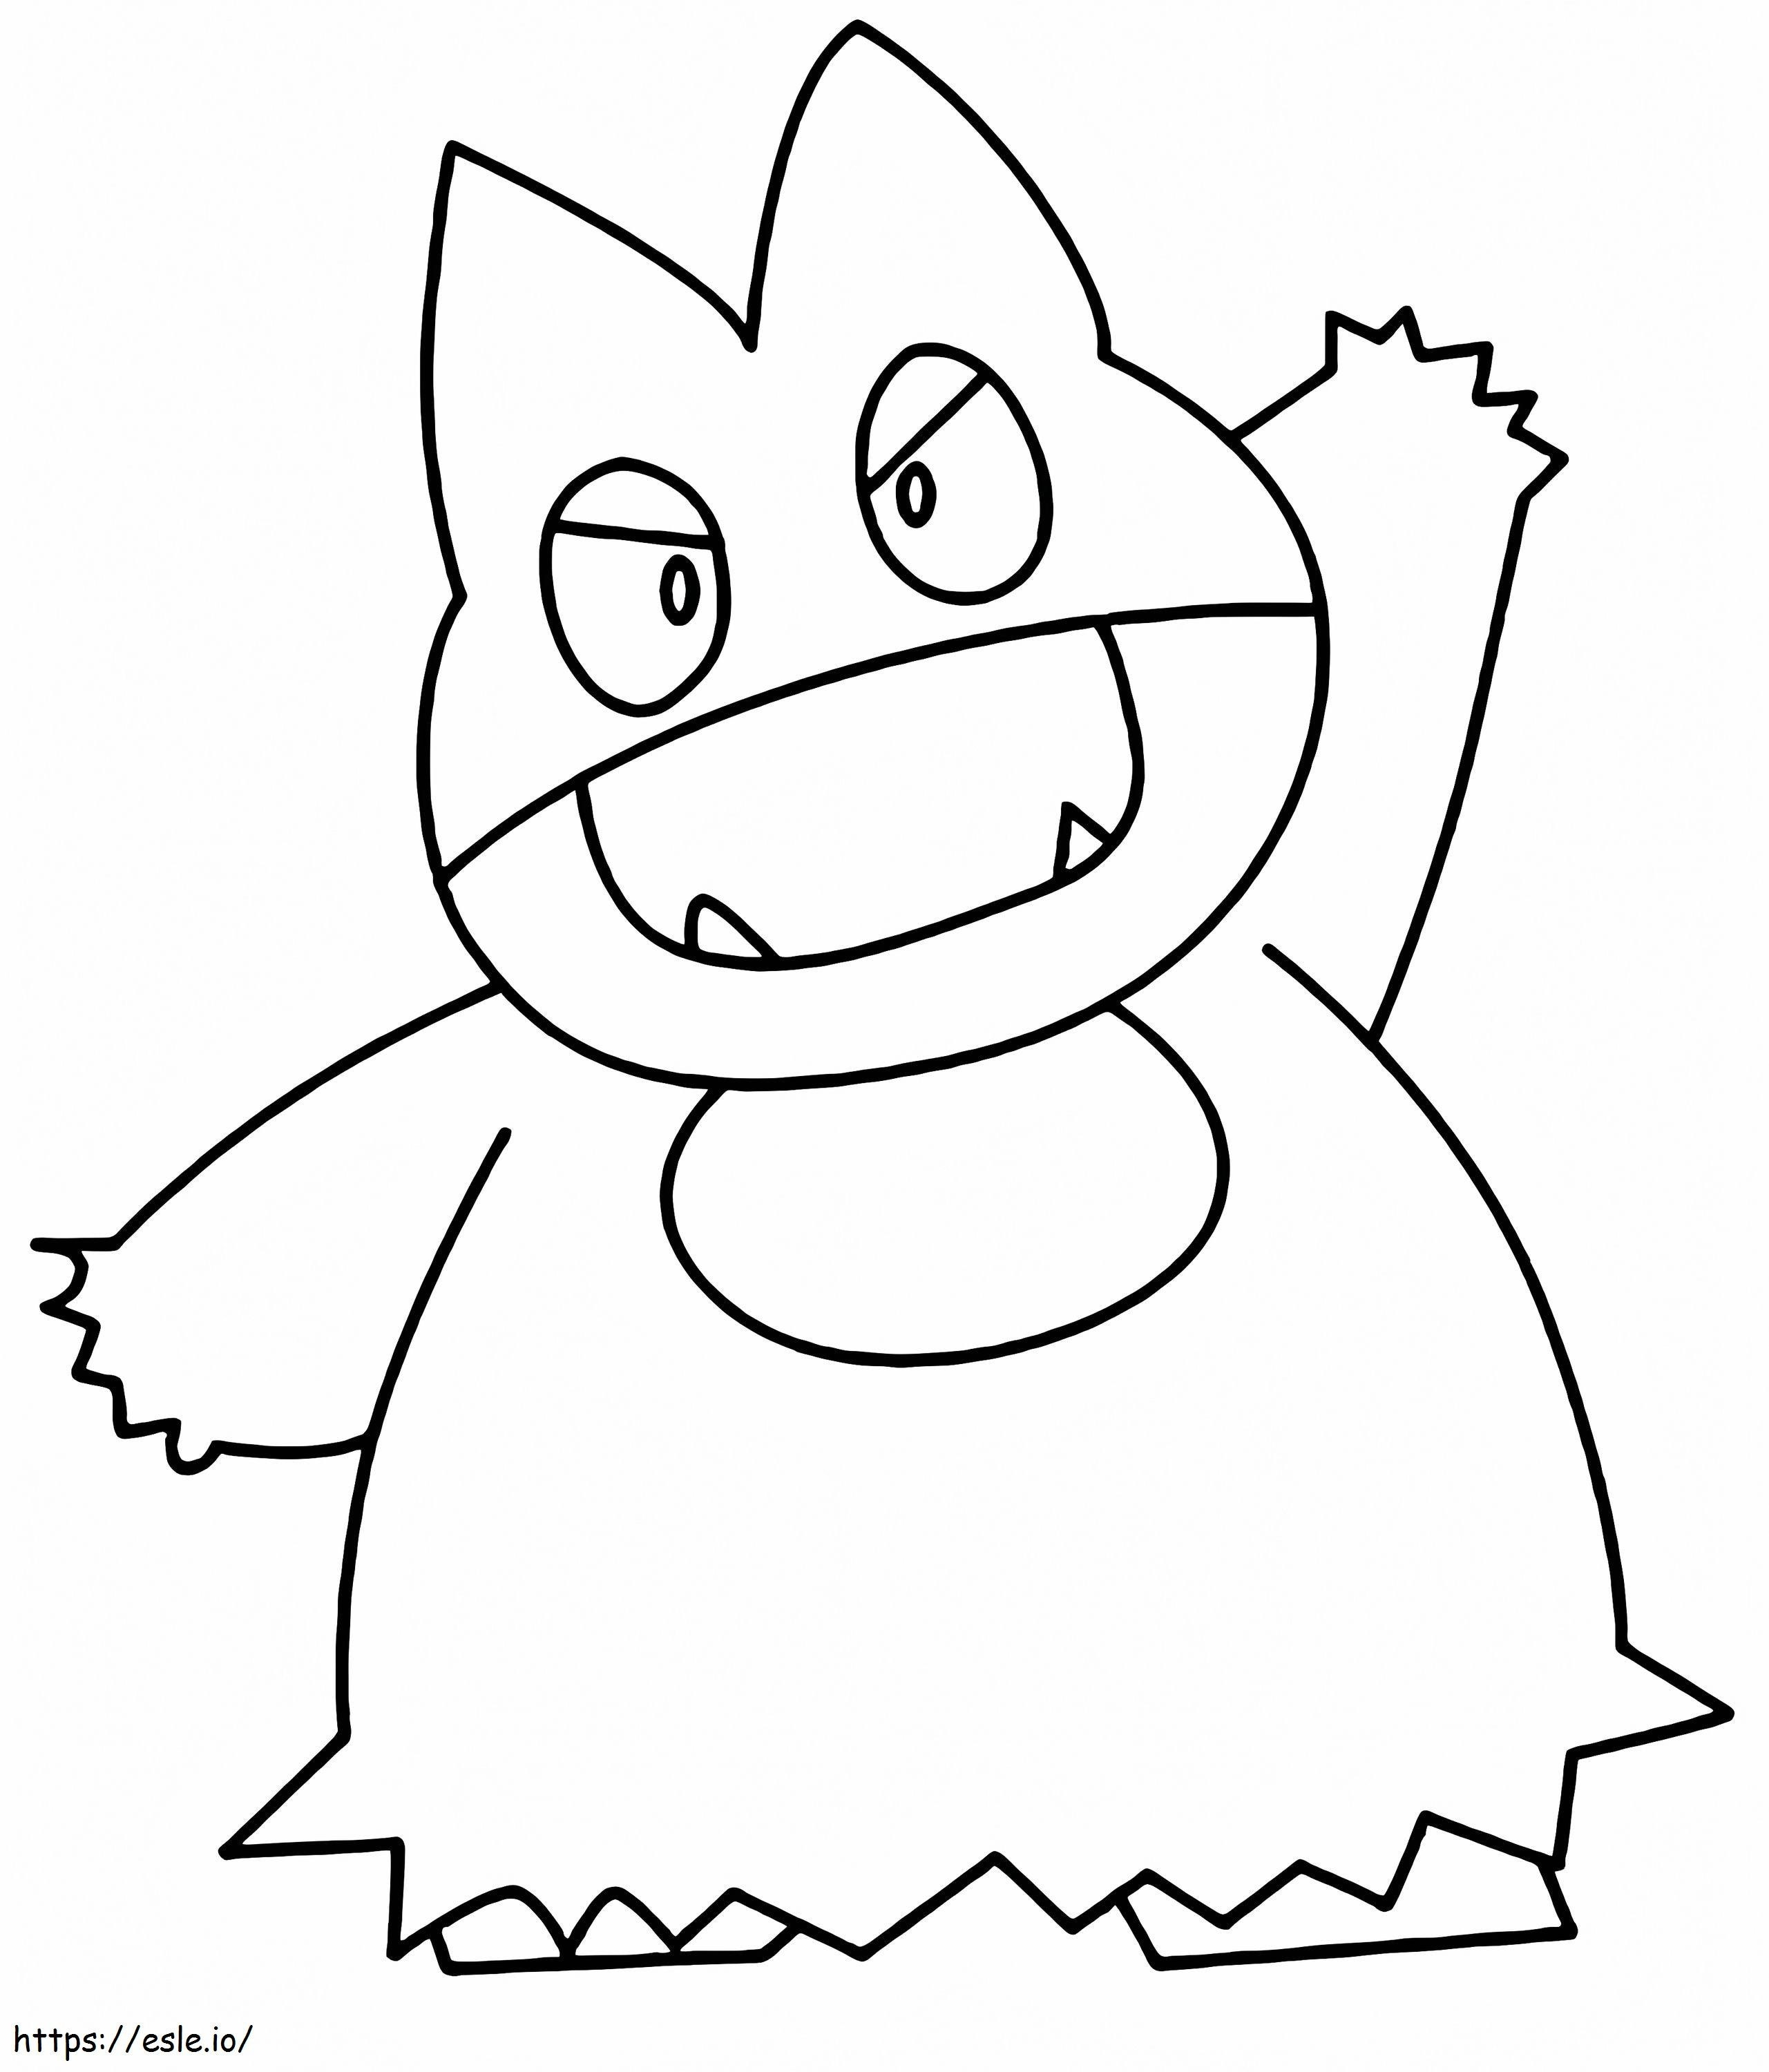 Angry Munchlax Pokemon coloring page